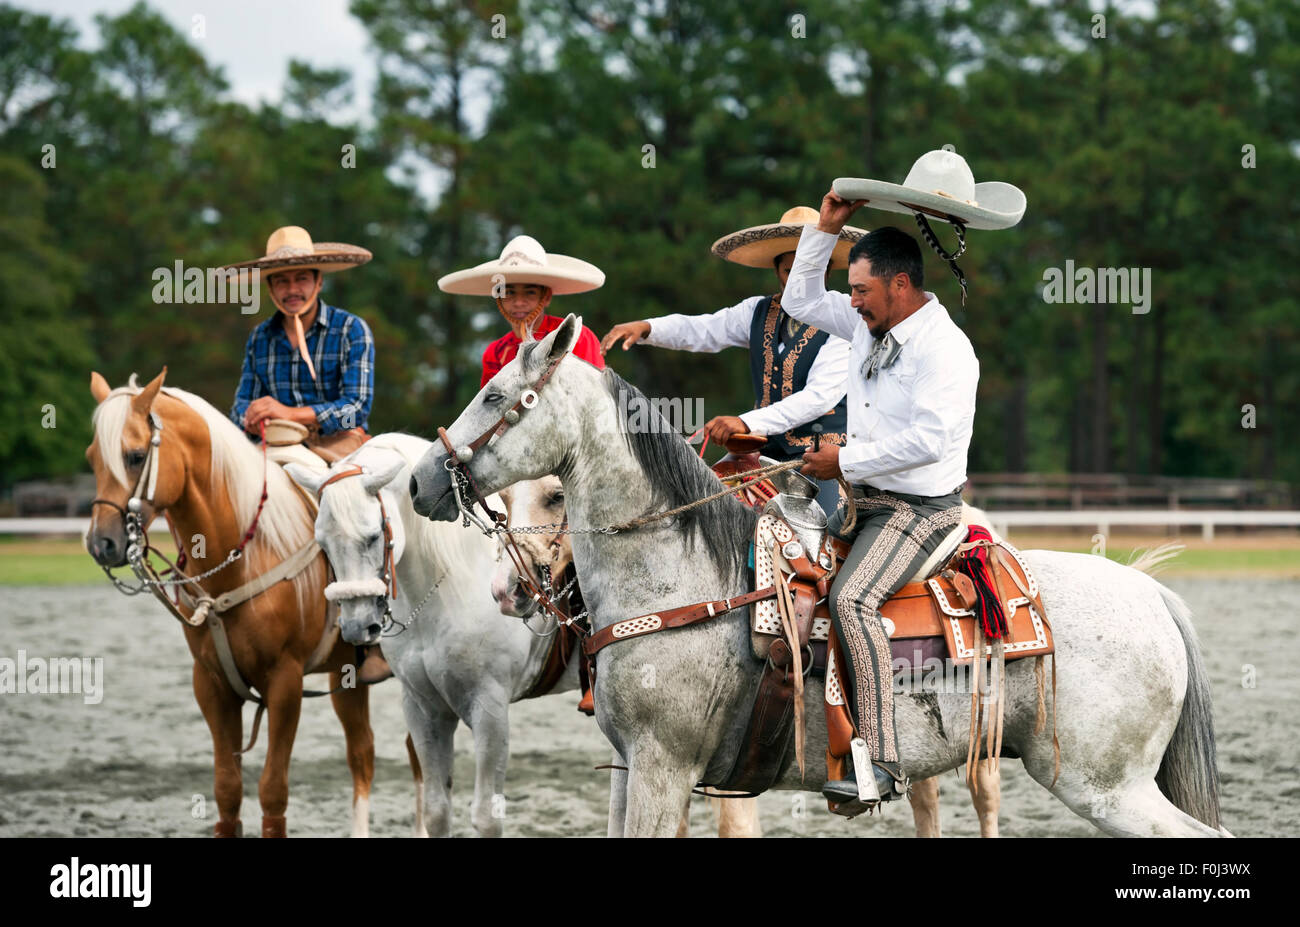 Azteca breed Mexican dancing horses and riders Stock Photo